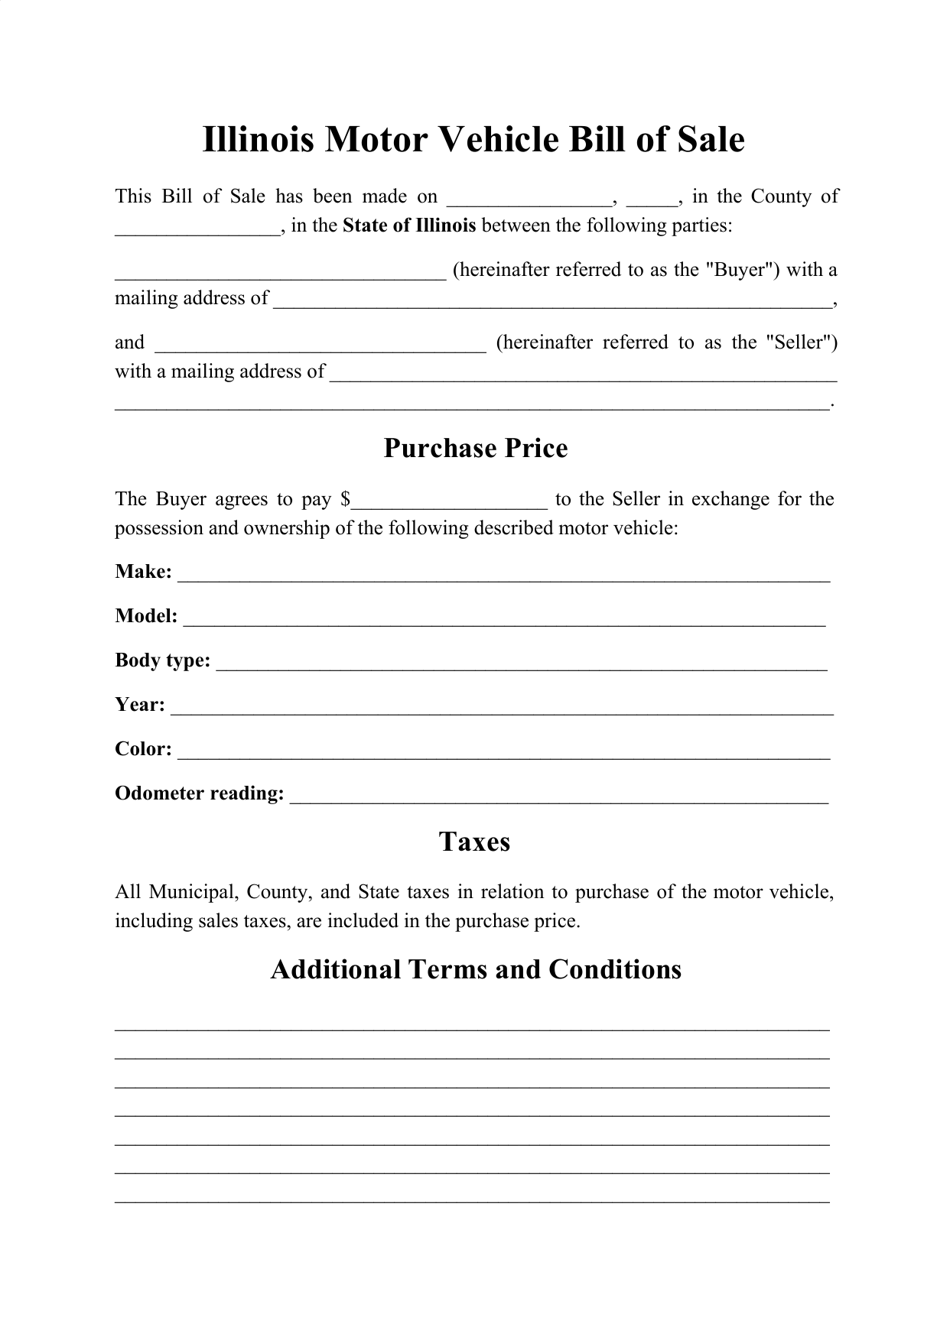 Motor Vehicle Bill of Sale Form - Illinois, Page 1